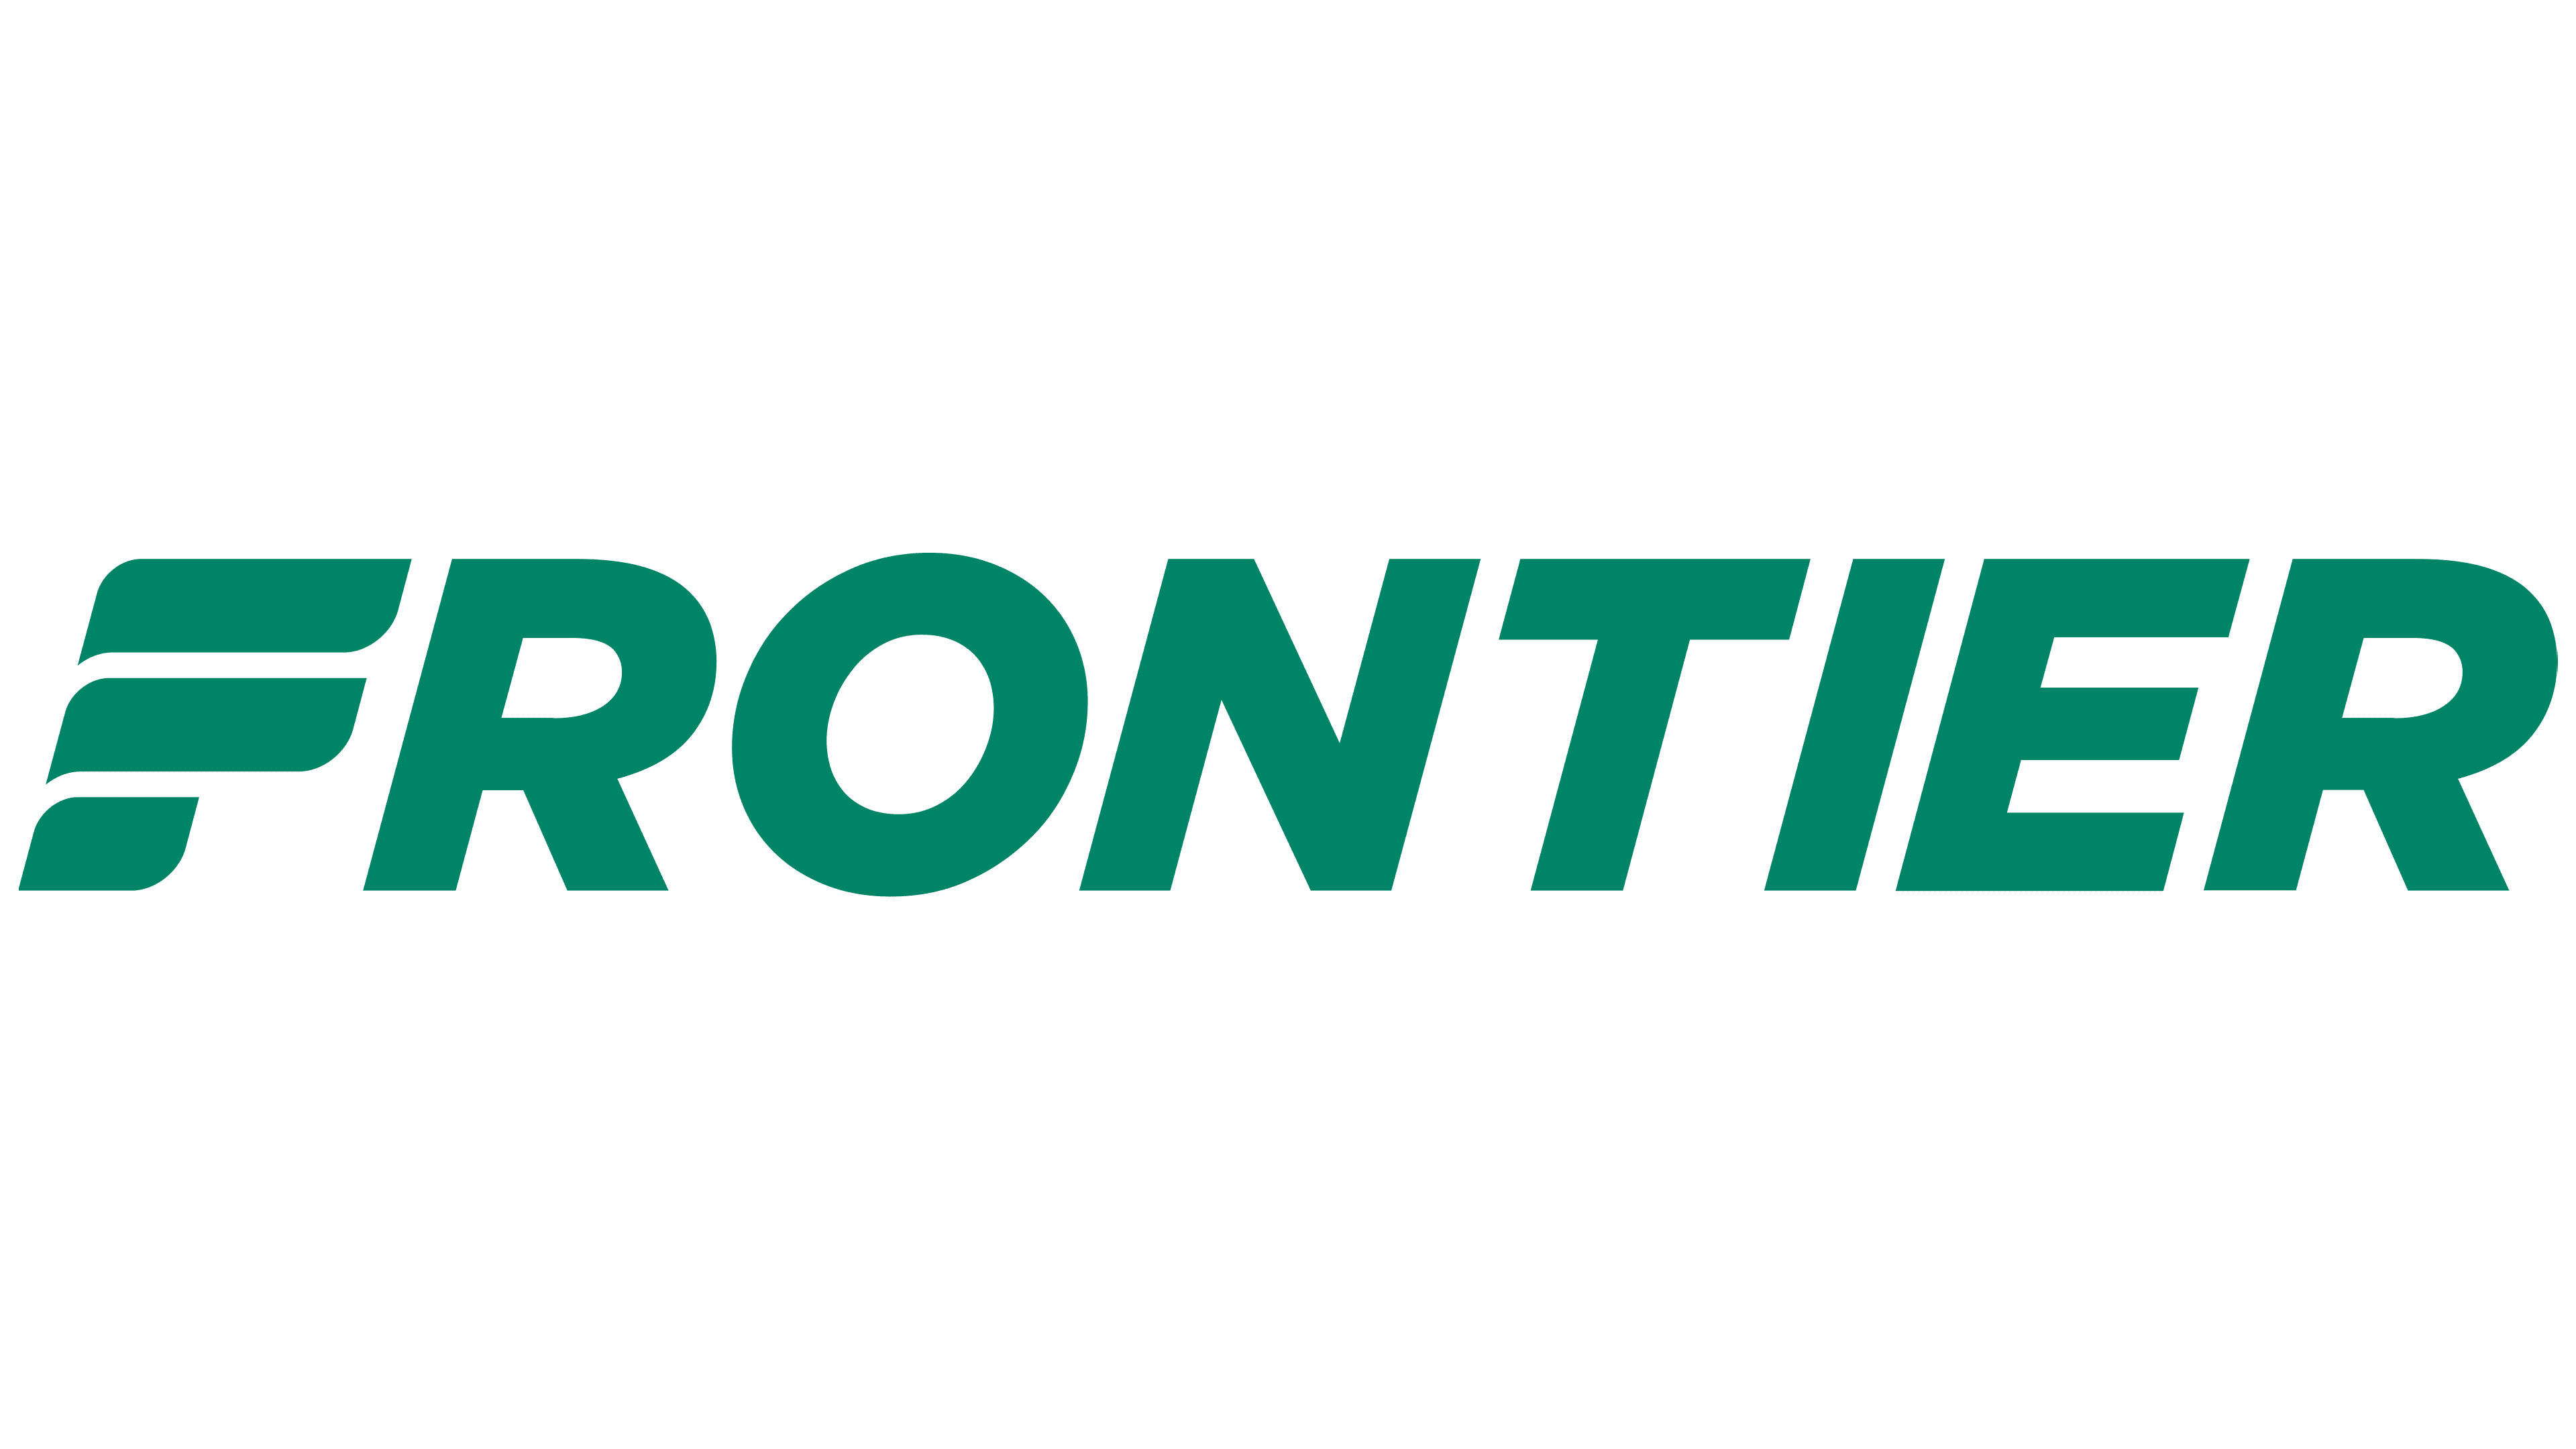 One way flights on Frontier for as little as $15